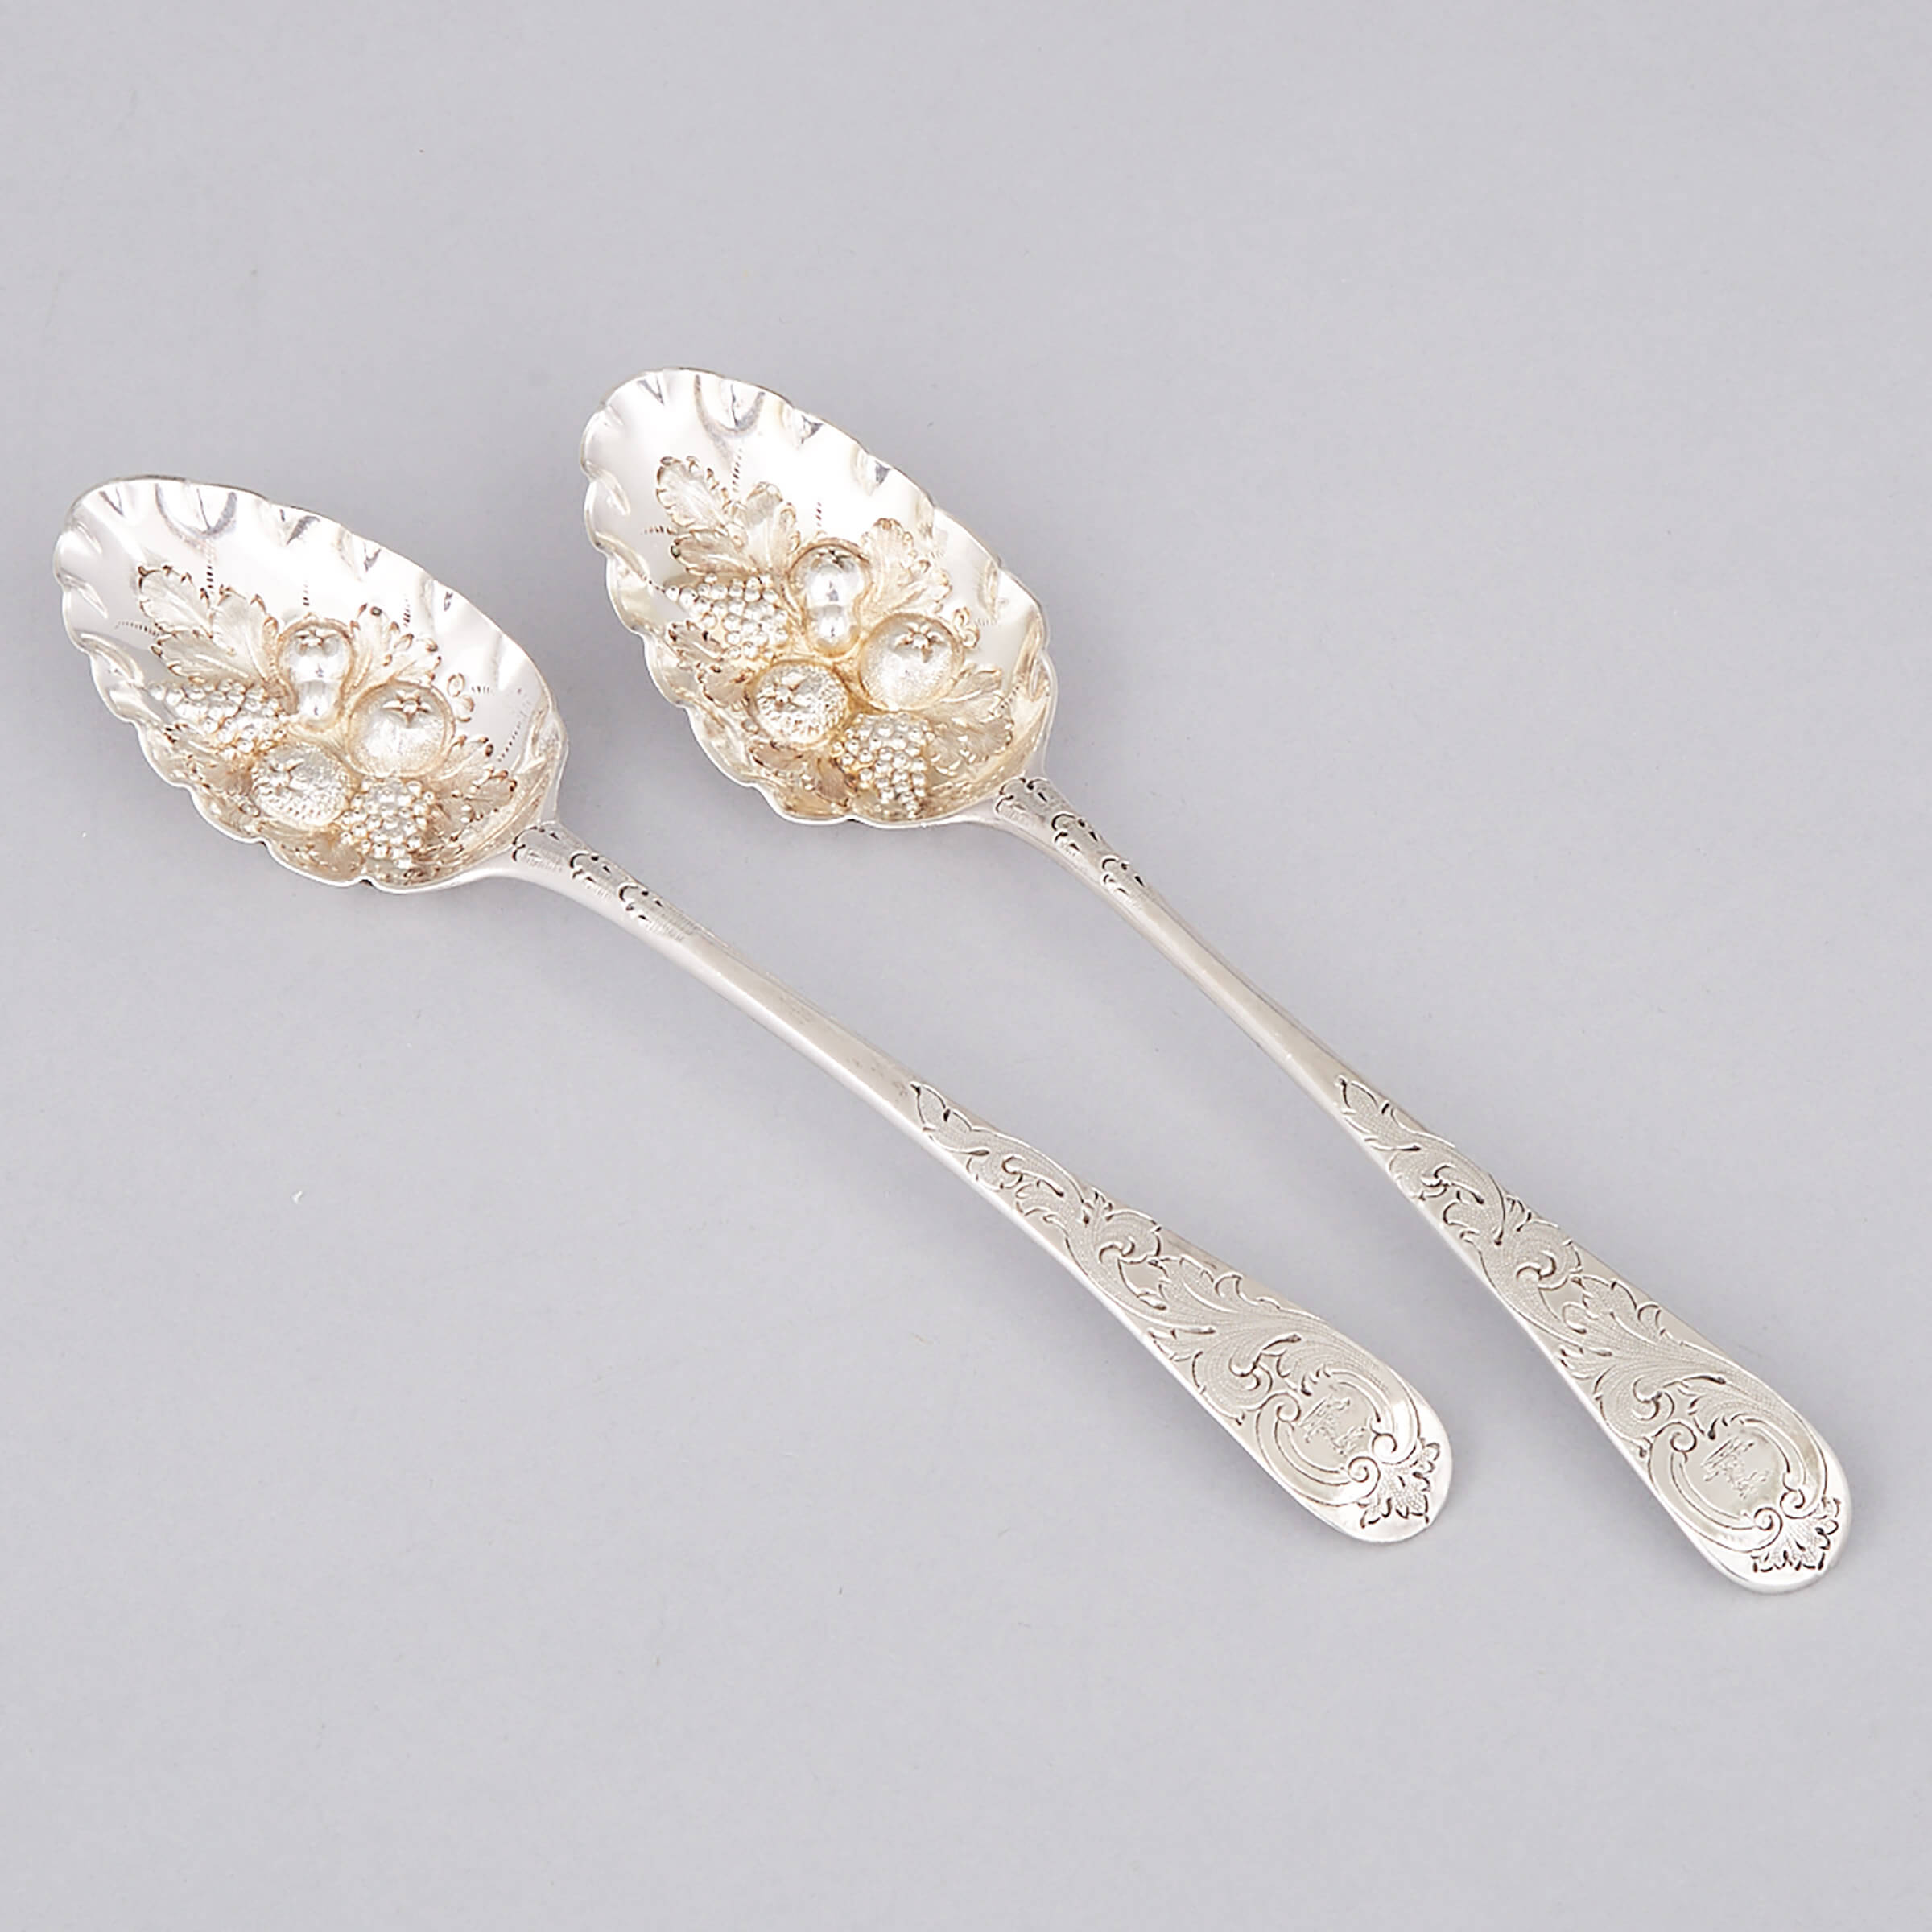 Two George III Silver Berry Spoons, Thomas & William Chawner and George Smith III, London, 1770/1780